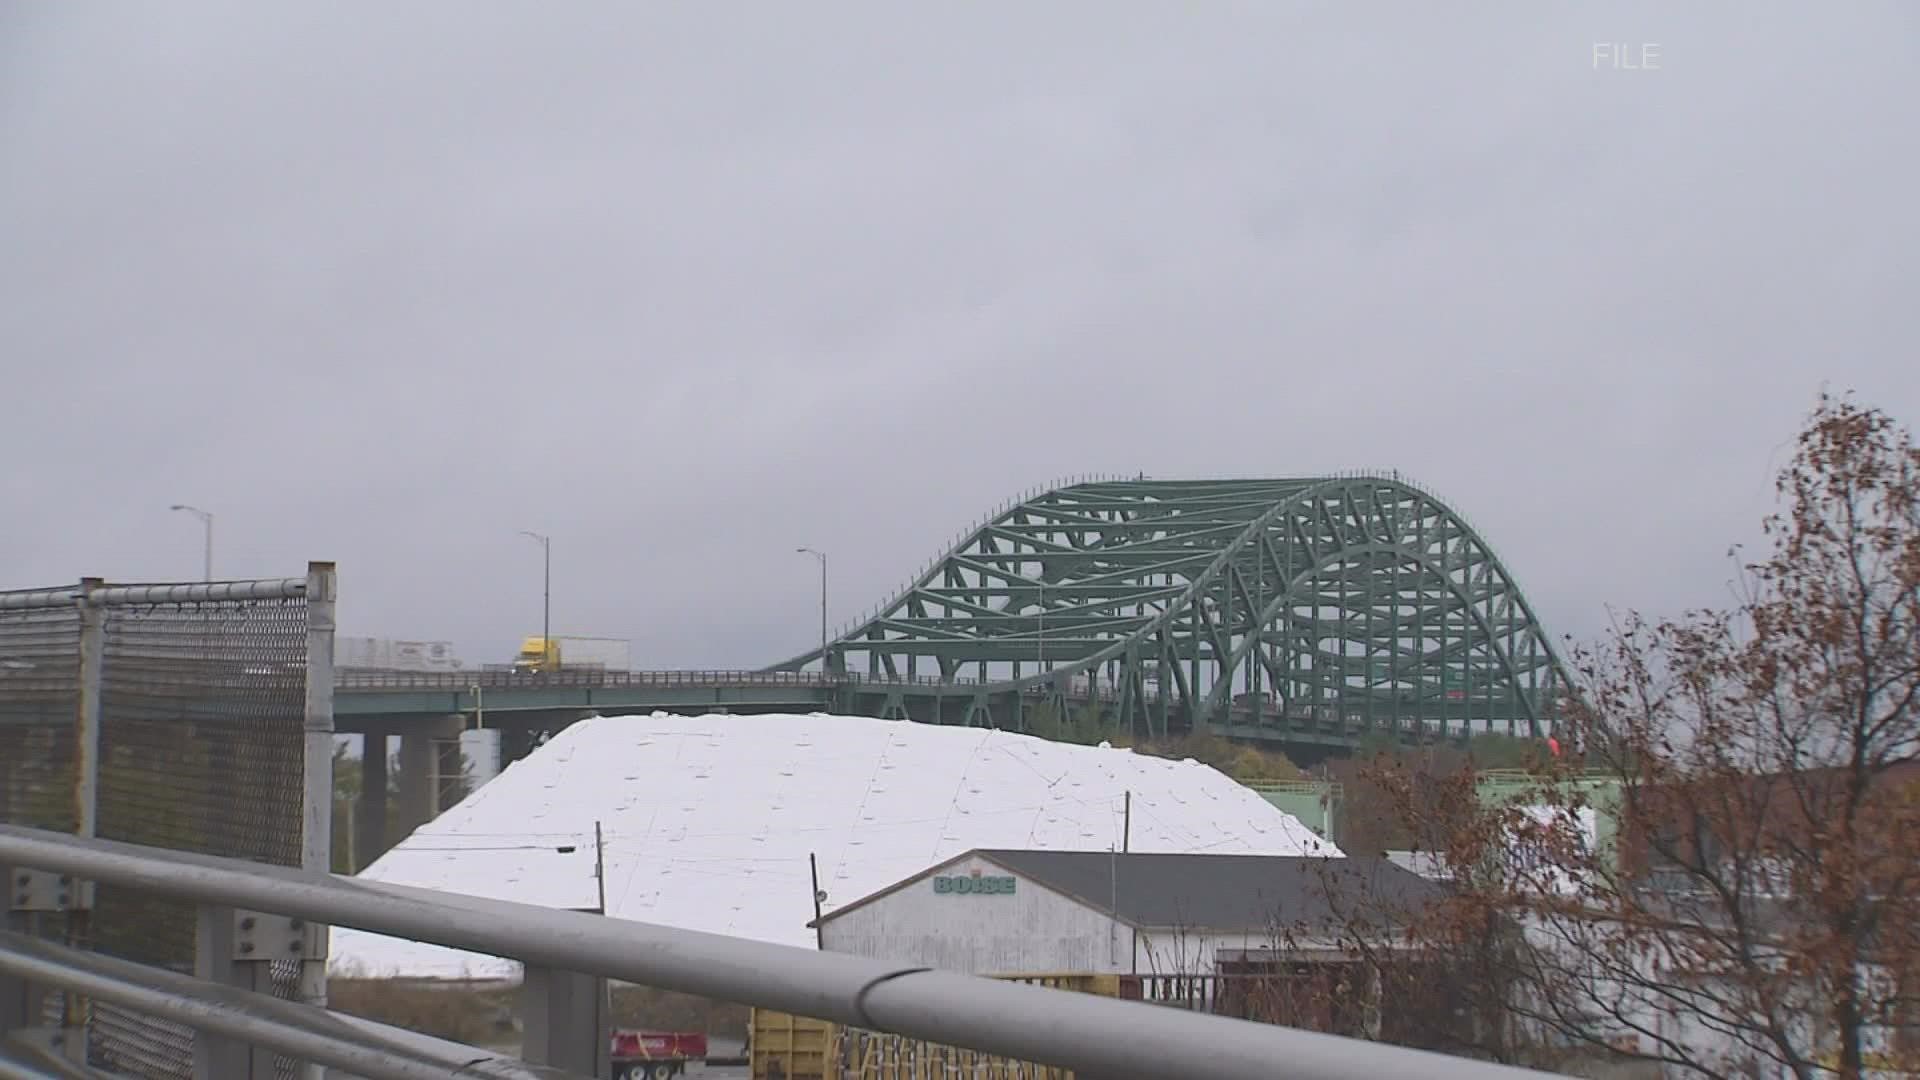 The Maine DOT says that the resurfacing work that began on the bridge in June 2019 is currently six weeks ahead of schedule, with paving to begin in September.